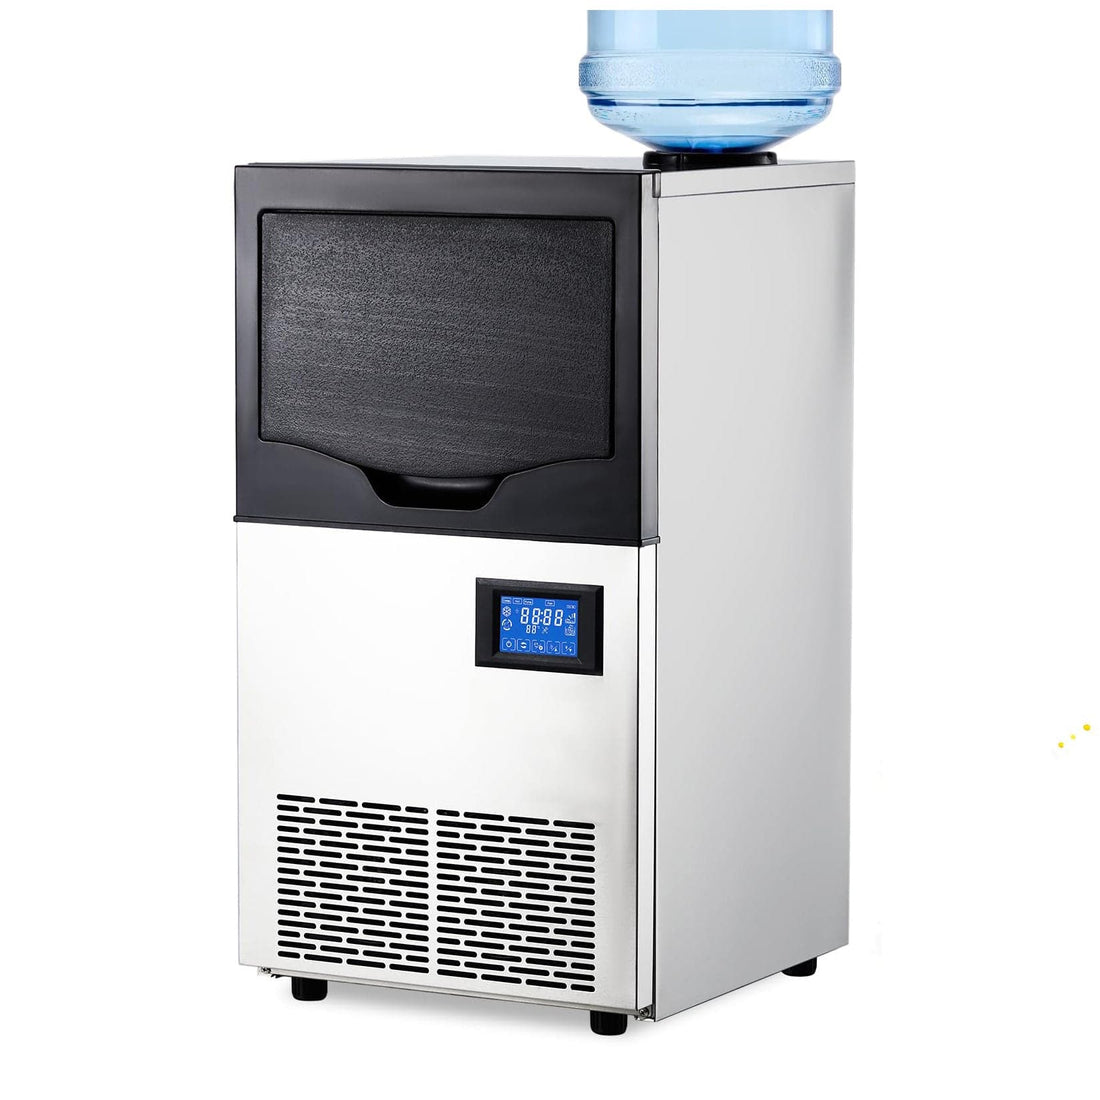 140Lbs/24H Ice Maker, Dual Water Inlet, 22Lbs Bin for Bars/Shops, LCD, Auto-Wash